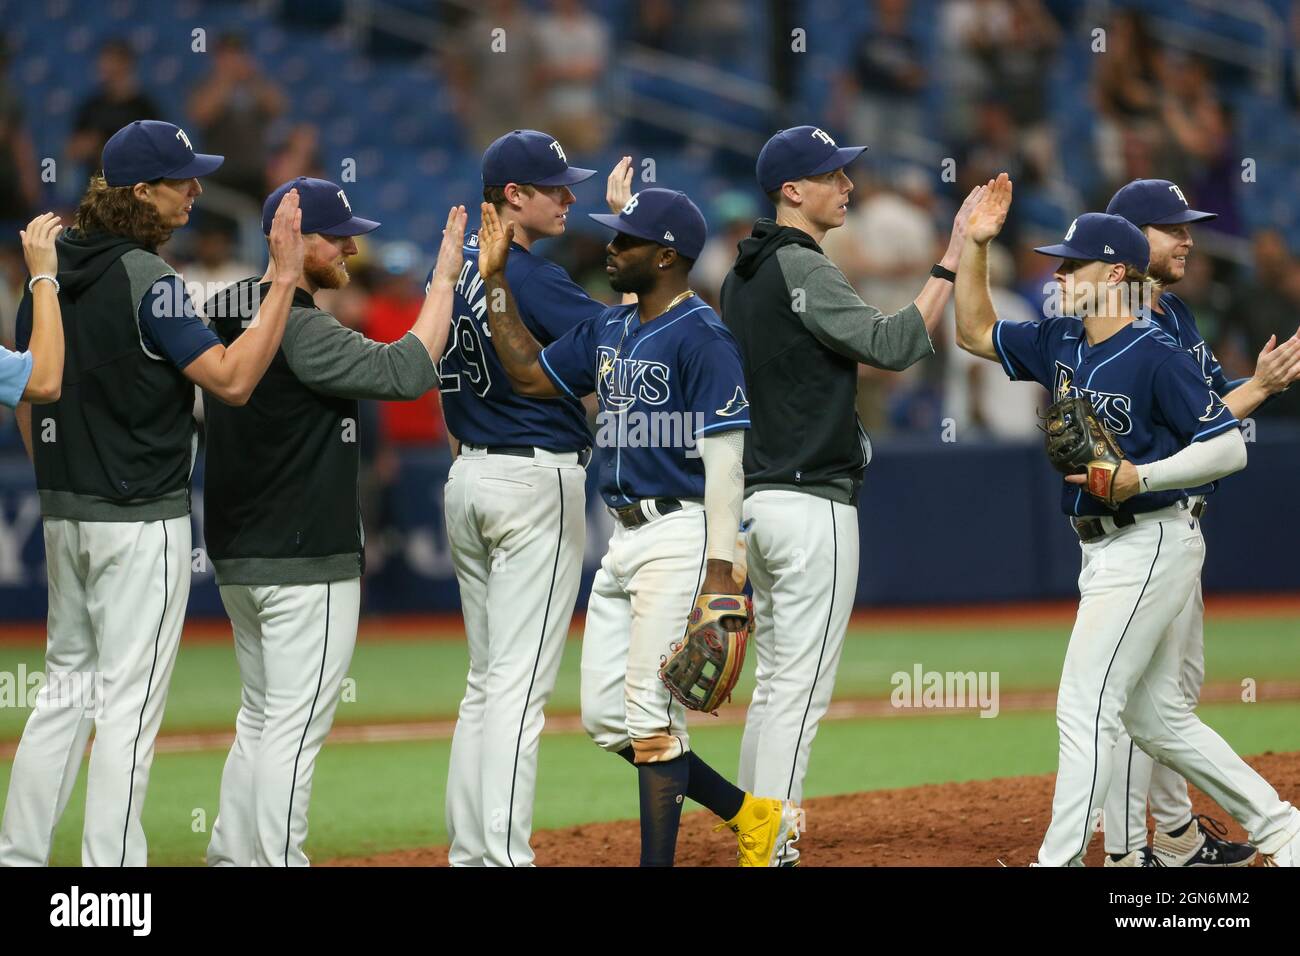 St. Petersburg, FL. USA;  The Tampa Bay Rays line up for the traditional congratulatory high fives after winning and clinching post season play for th Stock Photo